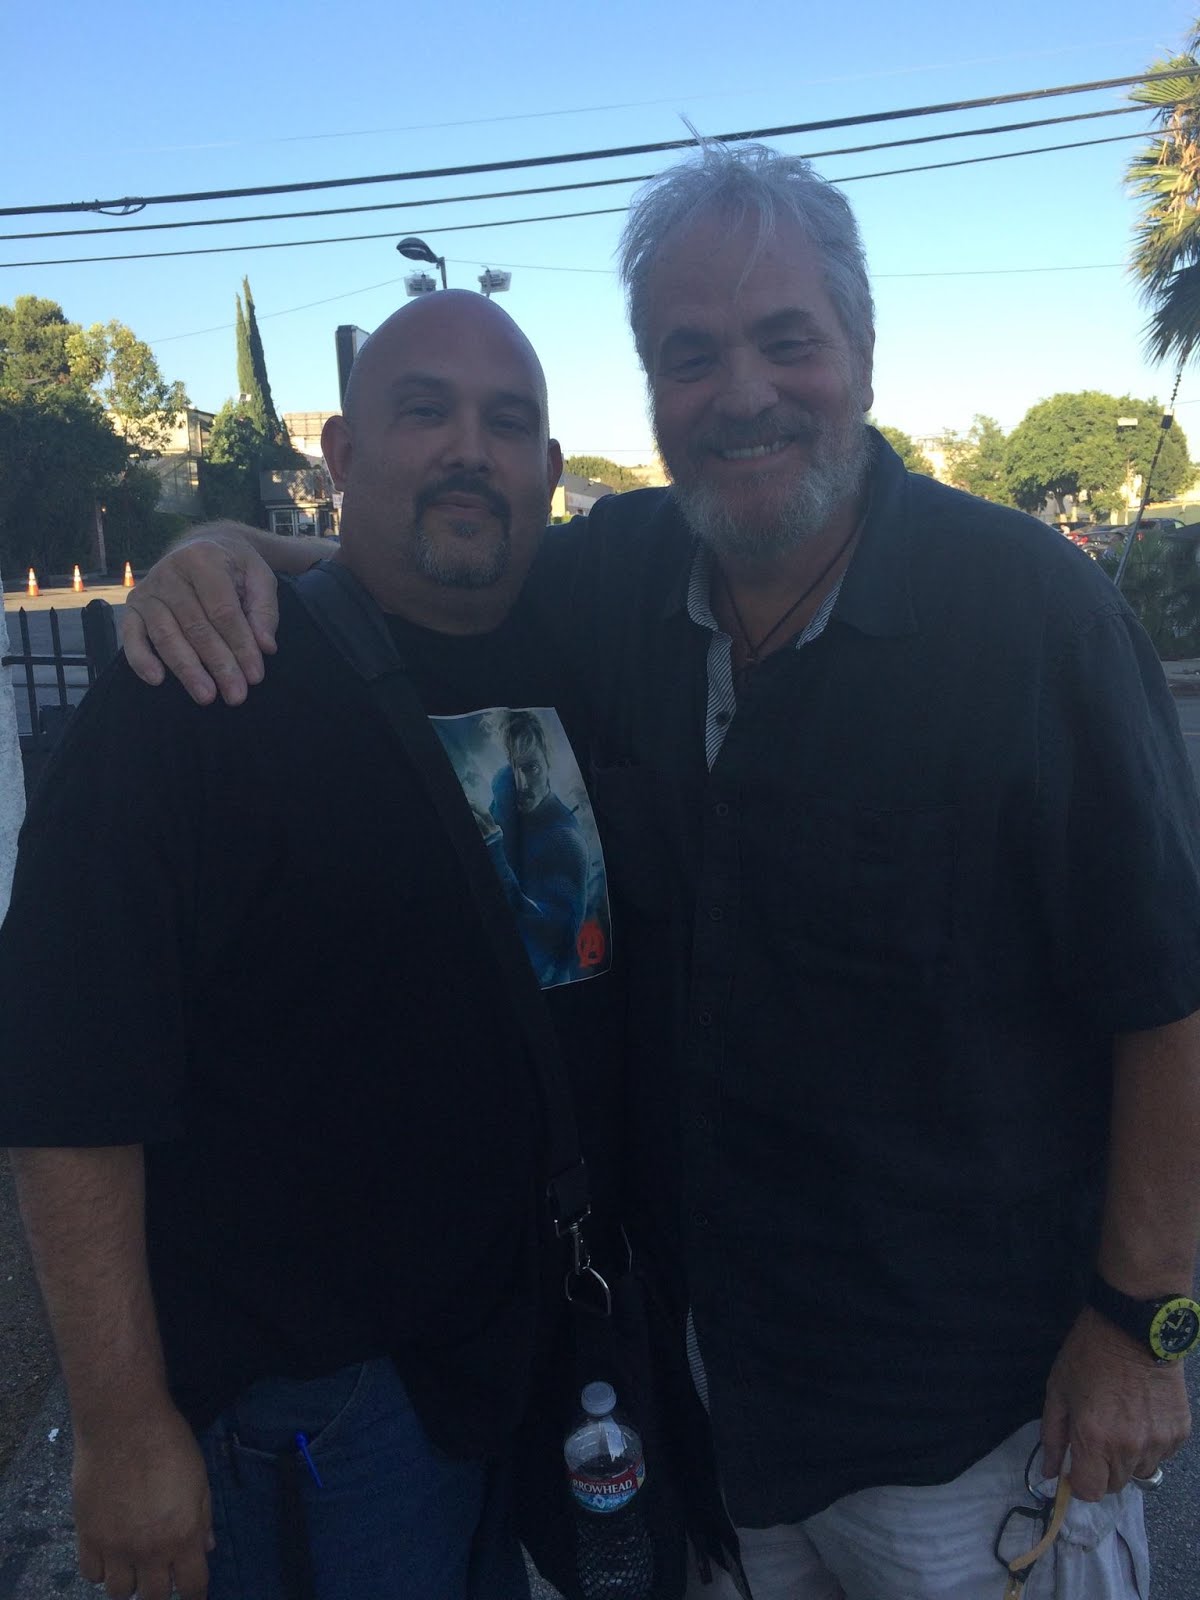 Me and M.C. Gainey